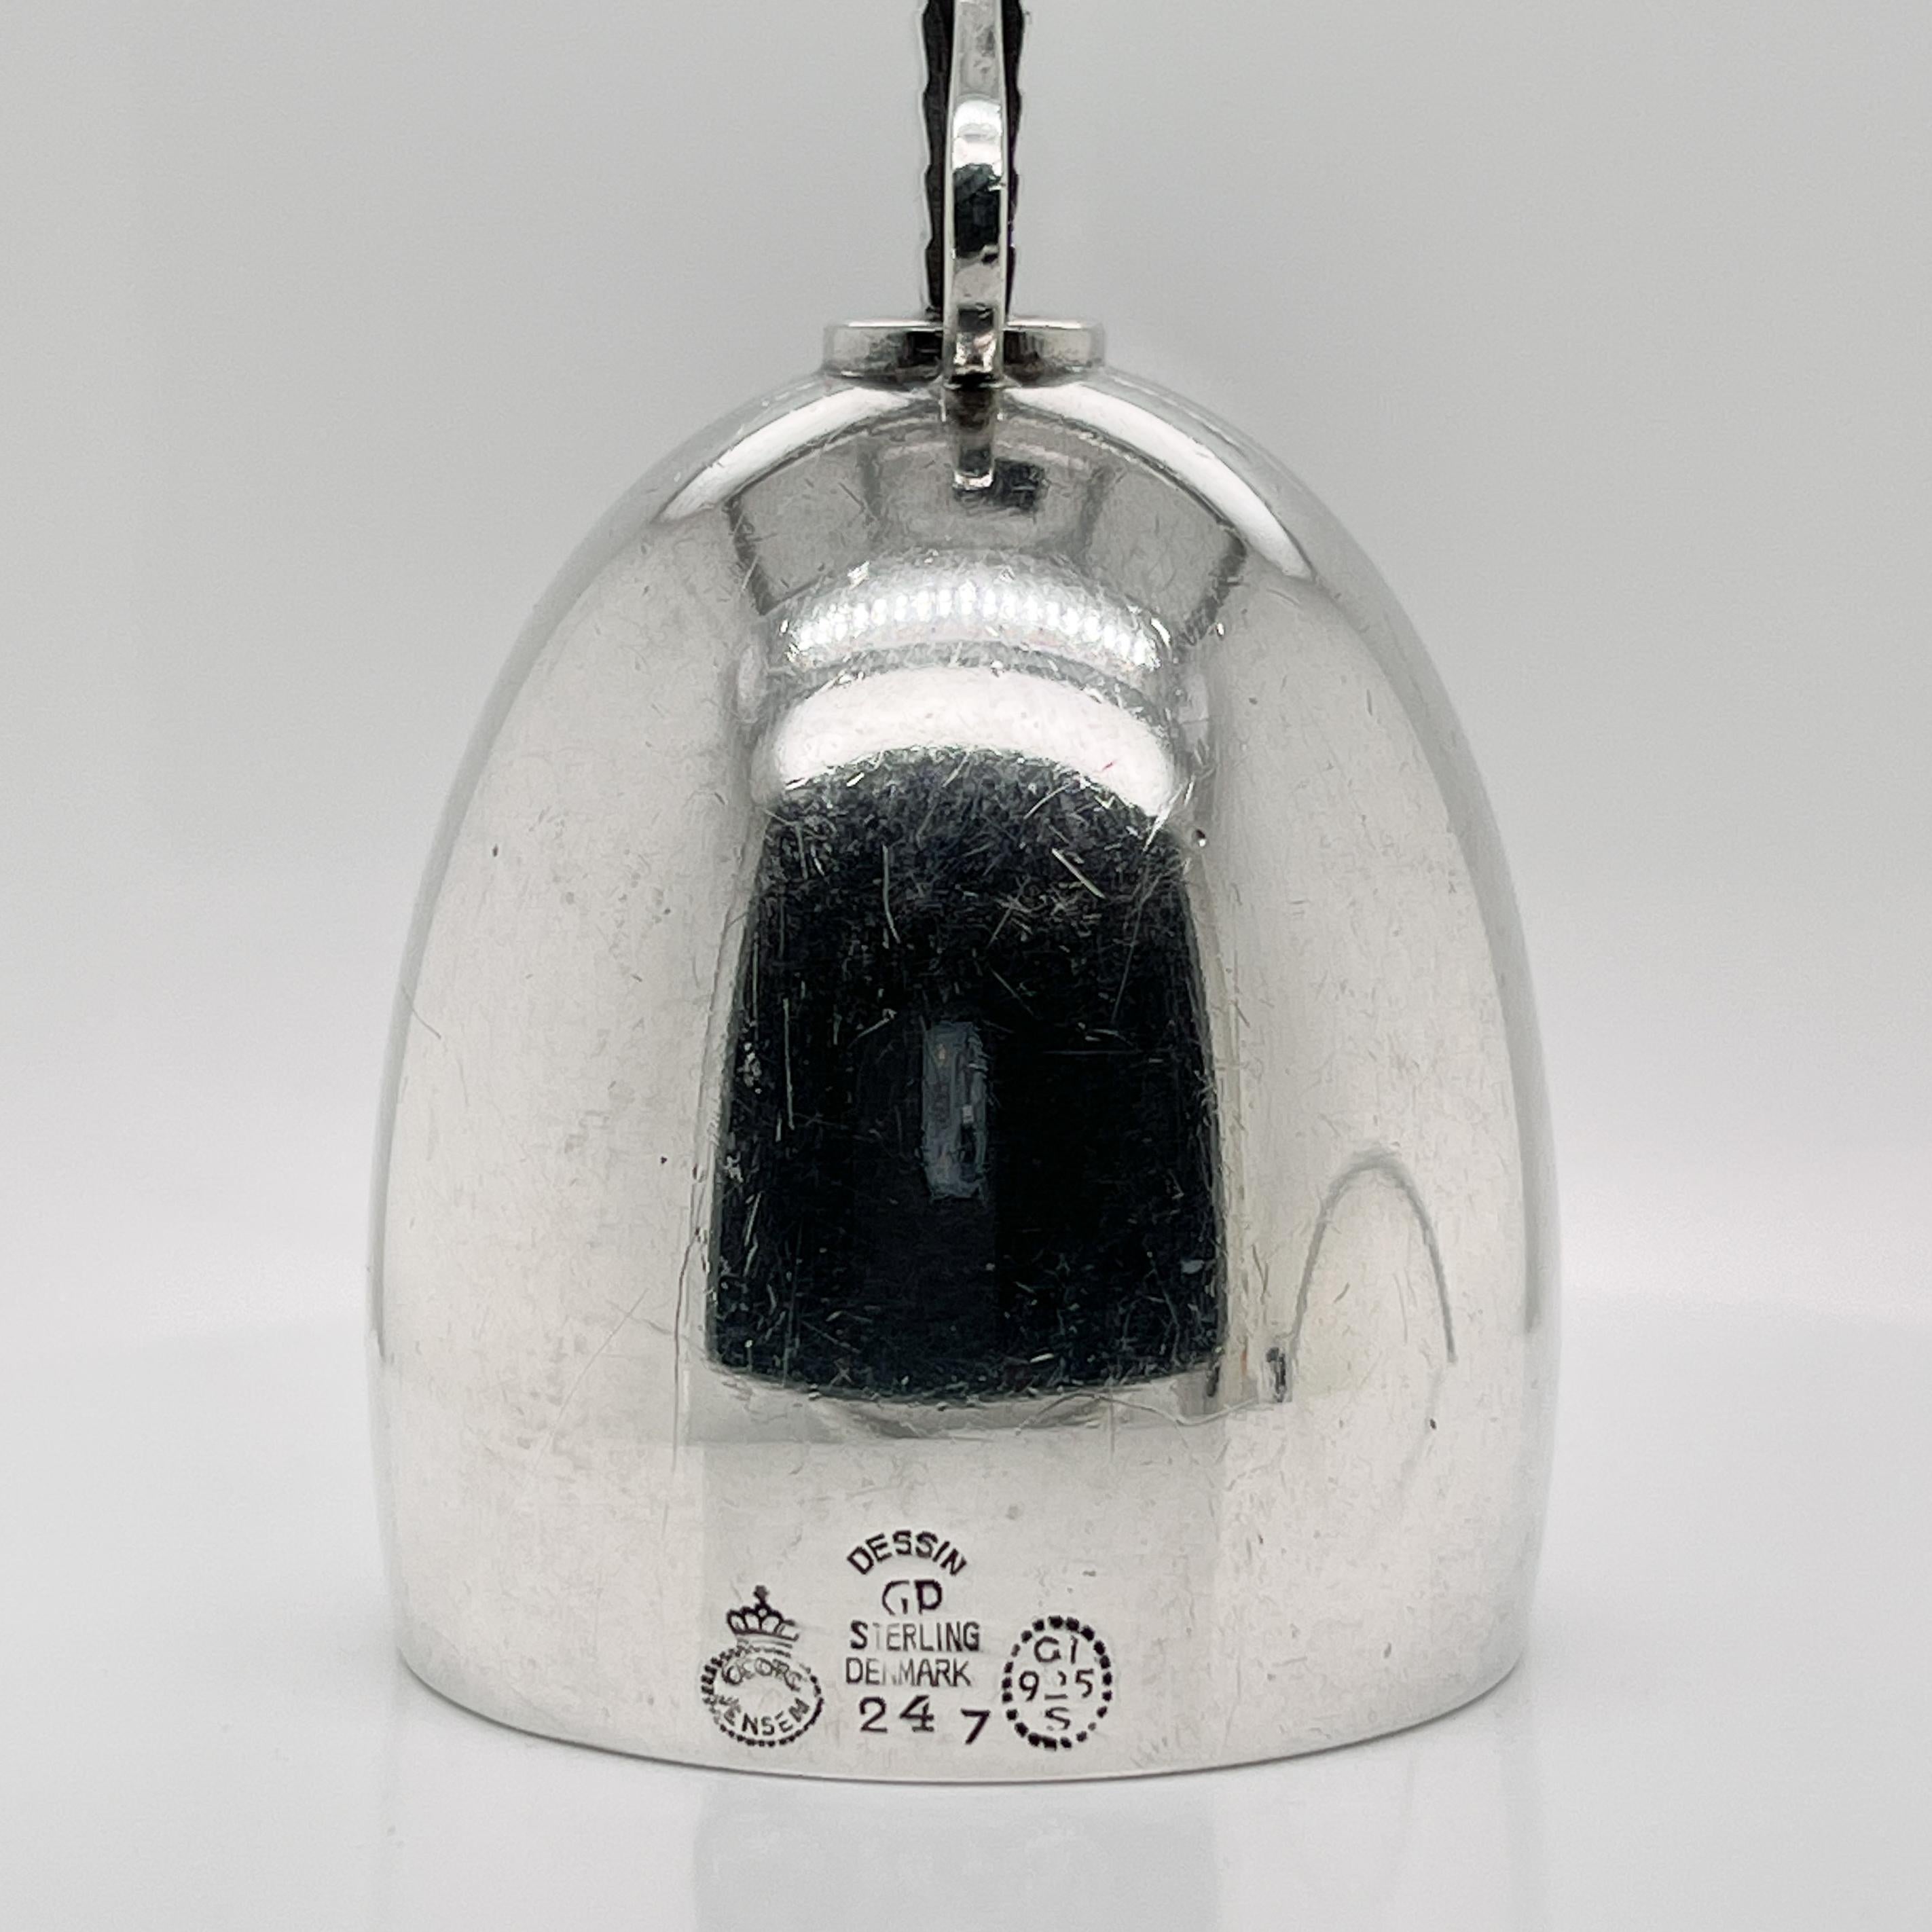 Antique Art Deco Georg Jensen Parallel Sterling Silver Table Bell No. 247 In Good Condition For Sale In Philadelphia, PA